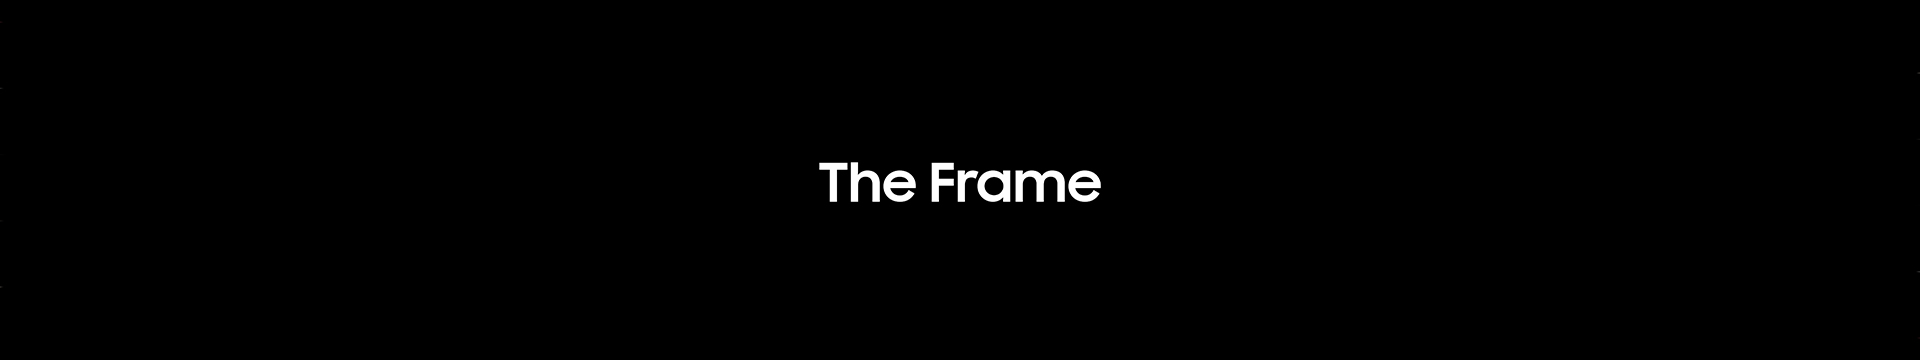 The Frame_final_00599